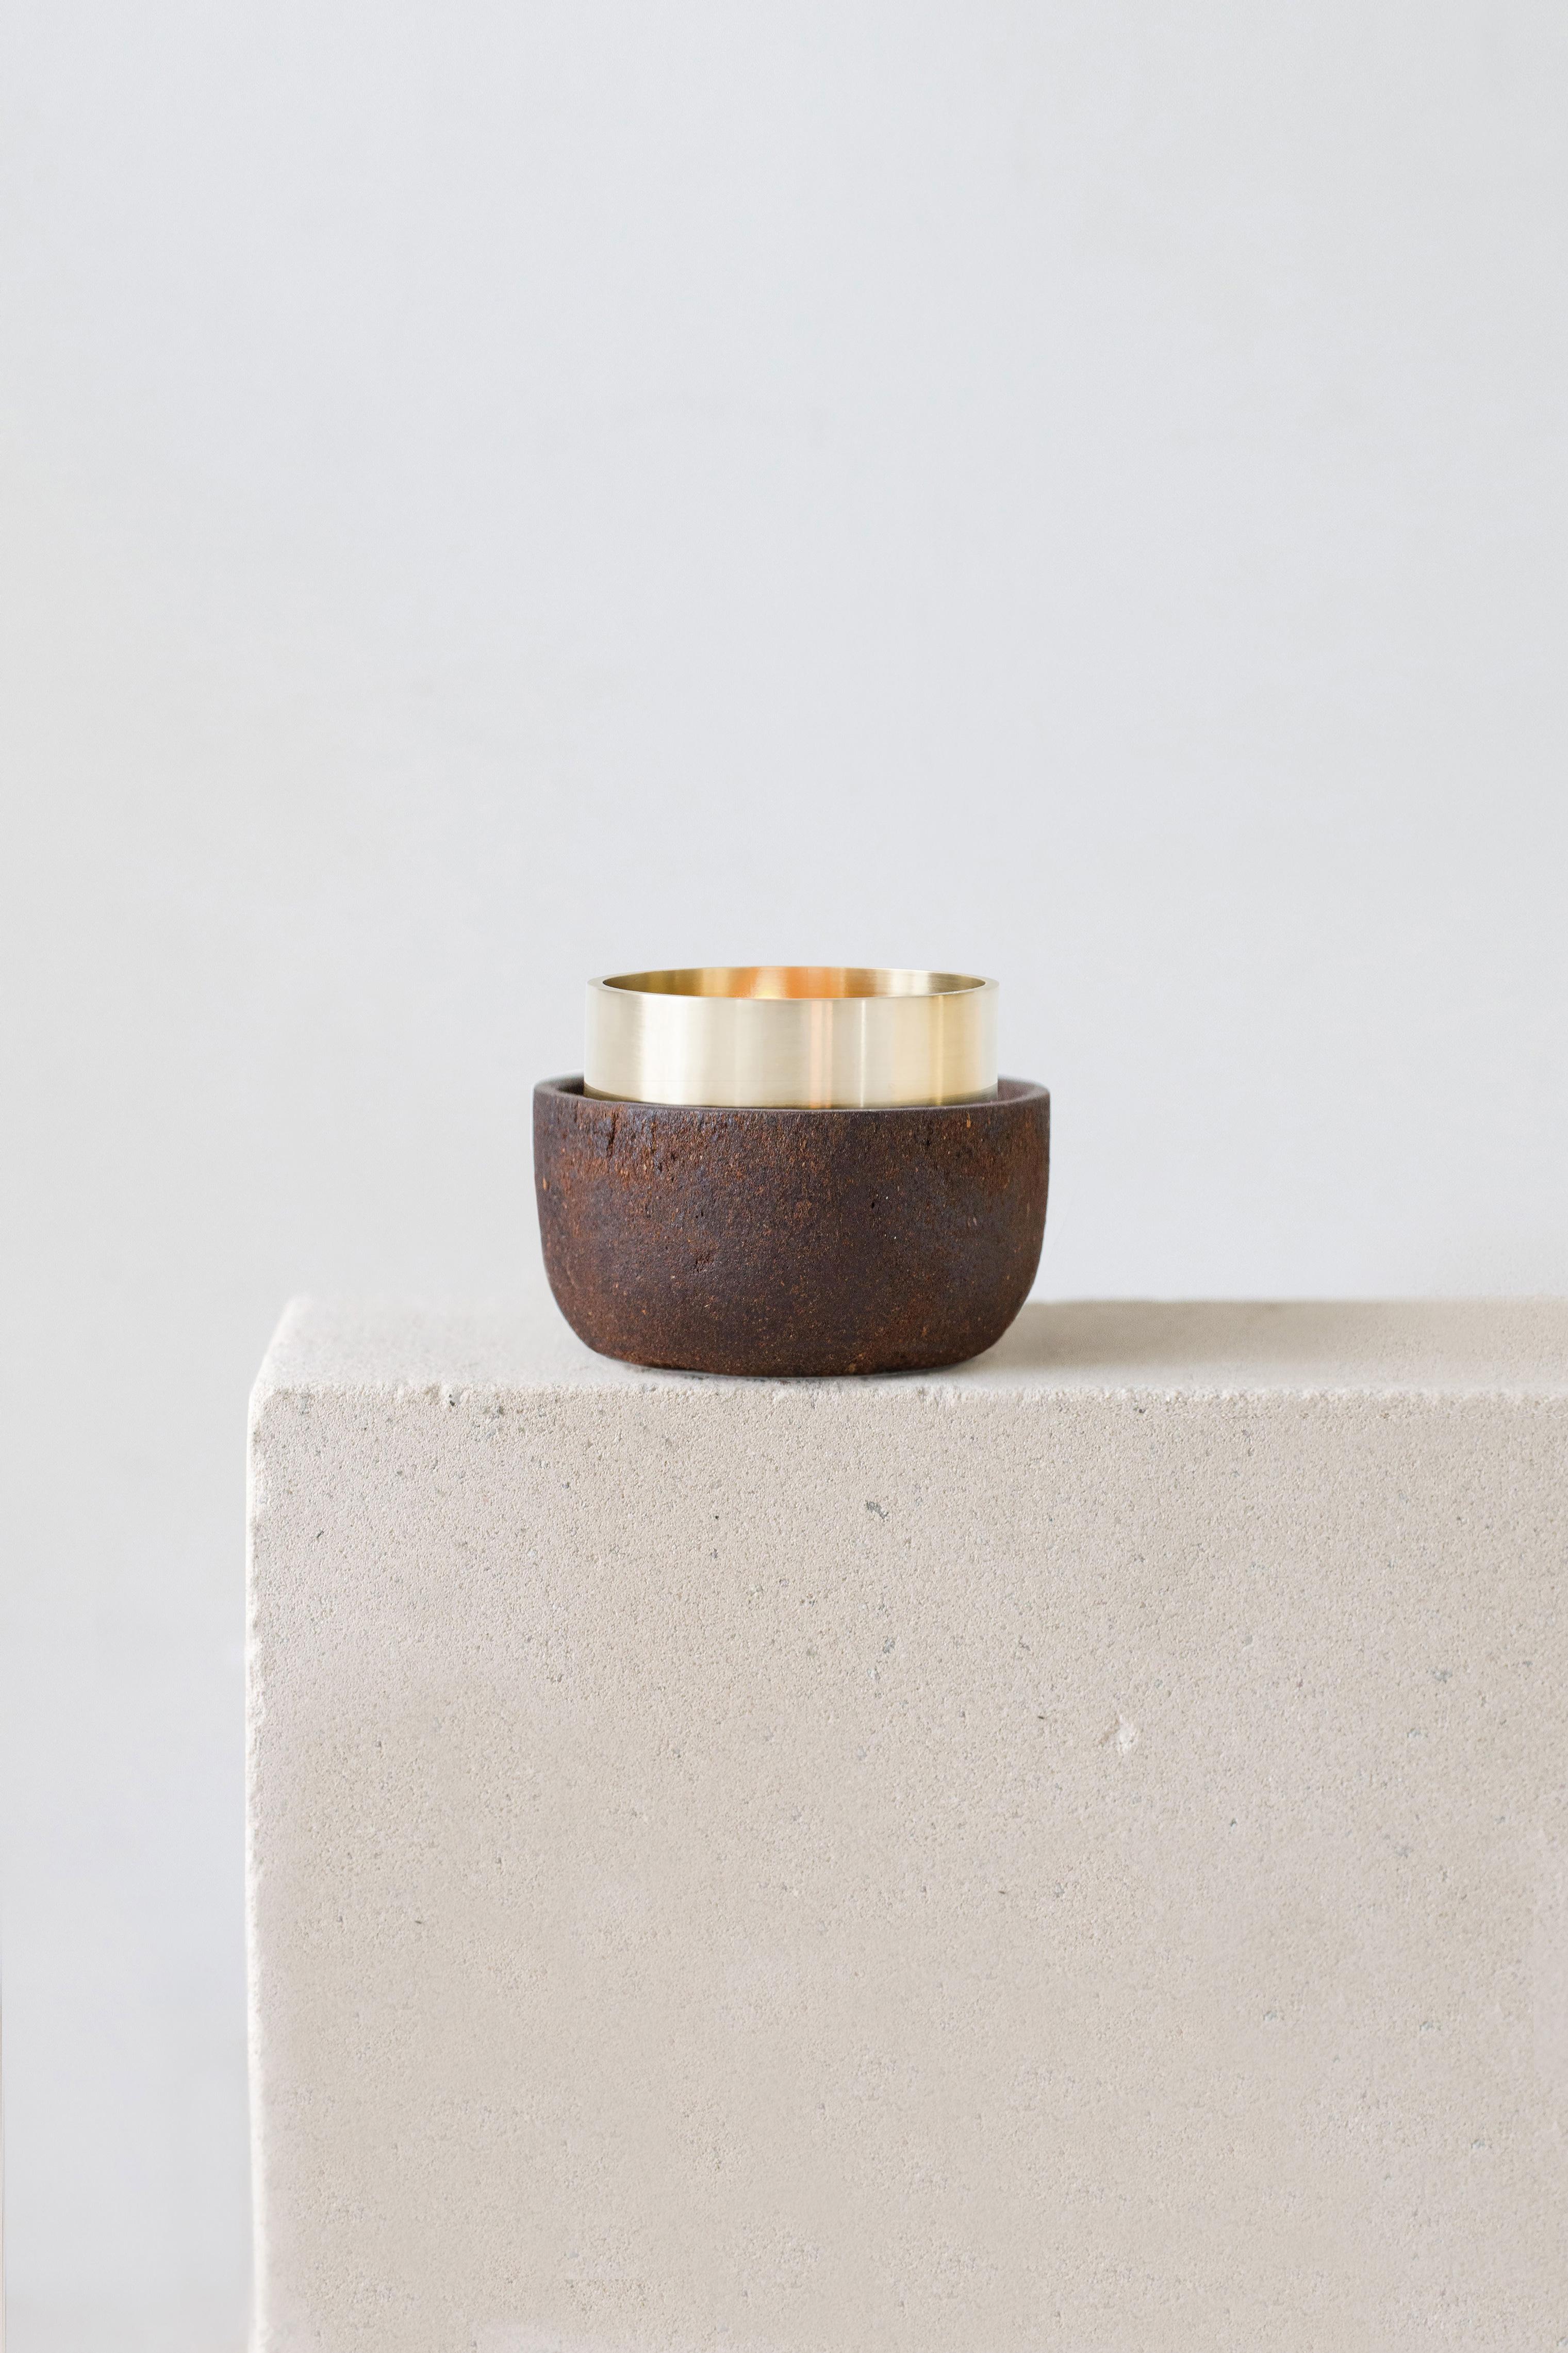 Pine candle holder by Evelina Kudabaite Studio
Handmade
Materials: pine, brass
Dimensions: H 55 mm x D 65 mm
Colour: reddish
Notes: for dry use

Since 2015, product designer Evelina Kudabaite keeps on developing and making GIRIA objects.